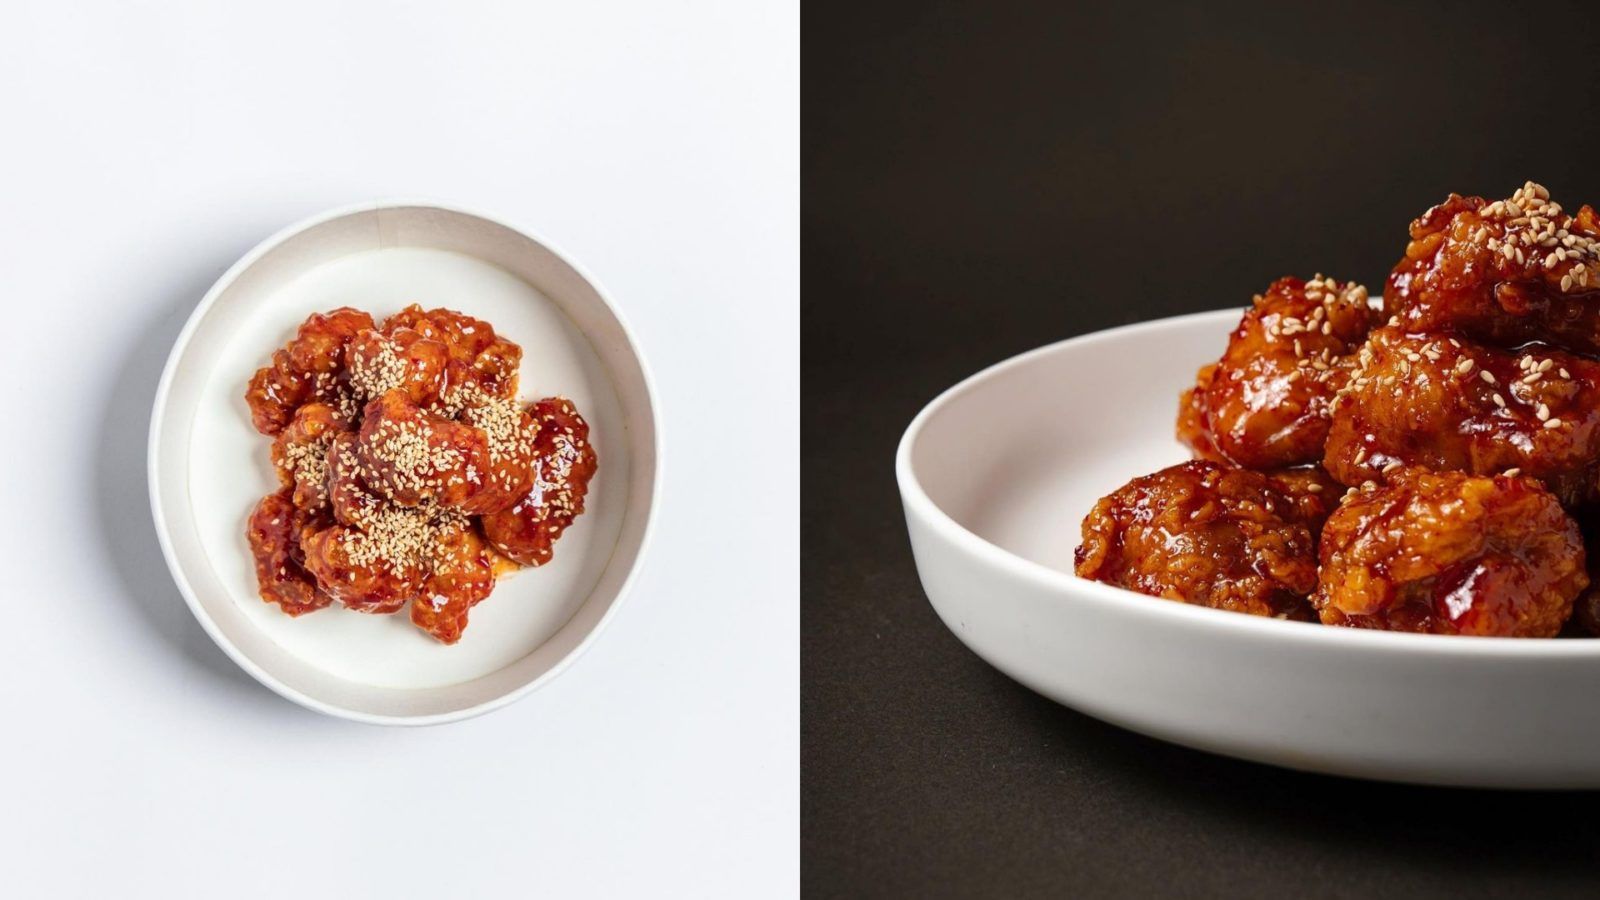 Best Bites: 4 dishes we loved this week